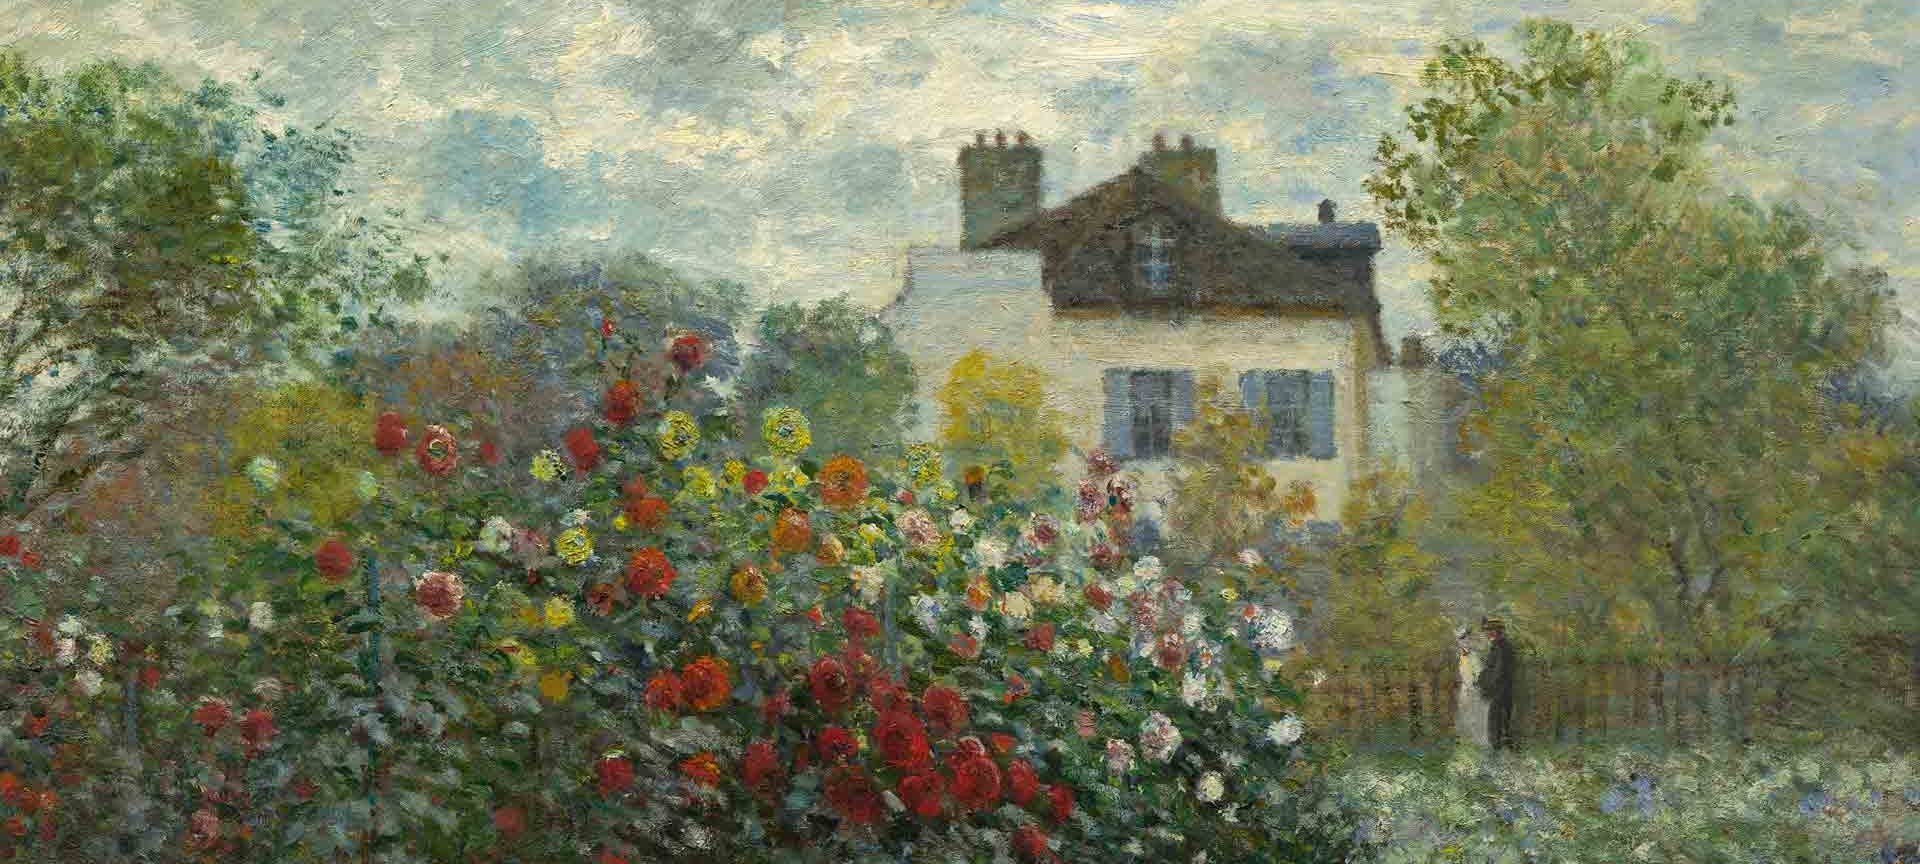 Exhibition on Screen: Painting The Modern Garden: Monet to Matisse